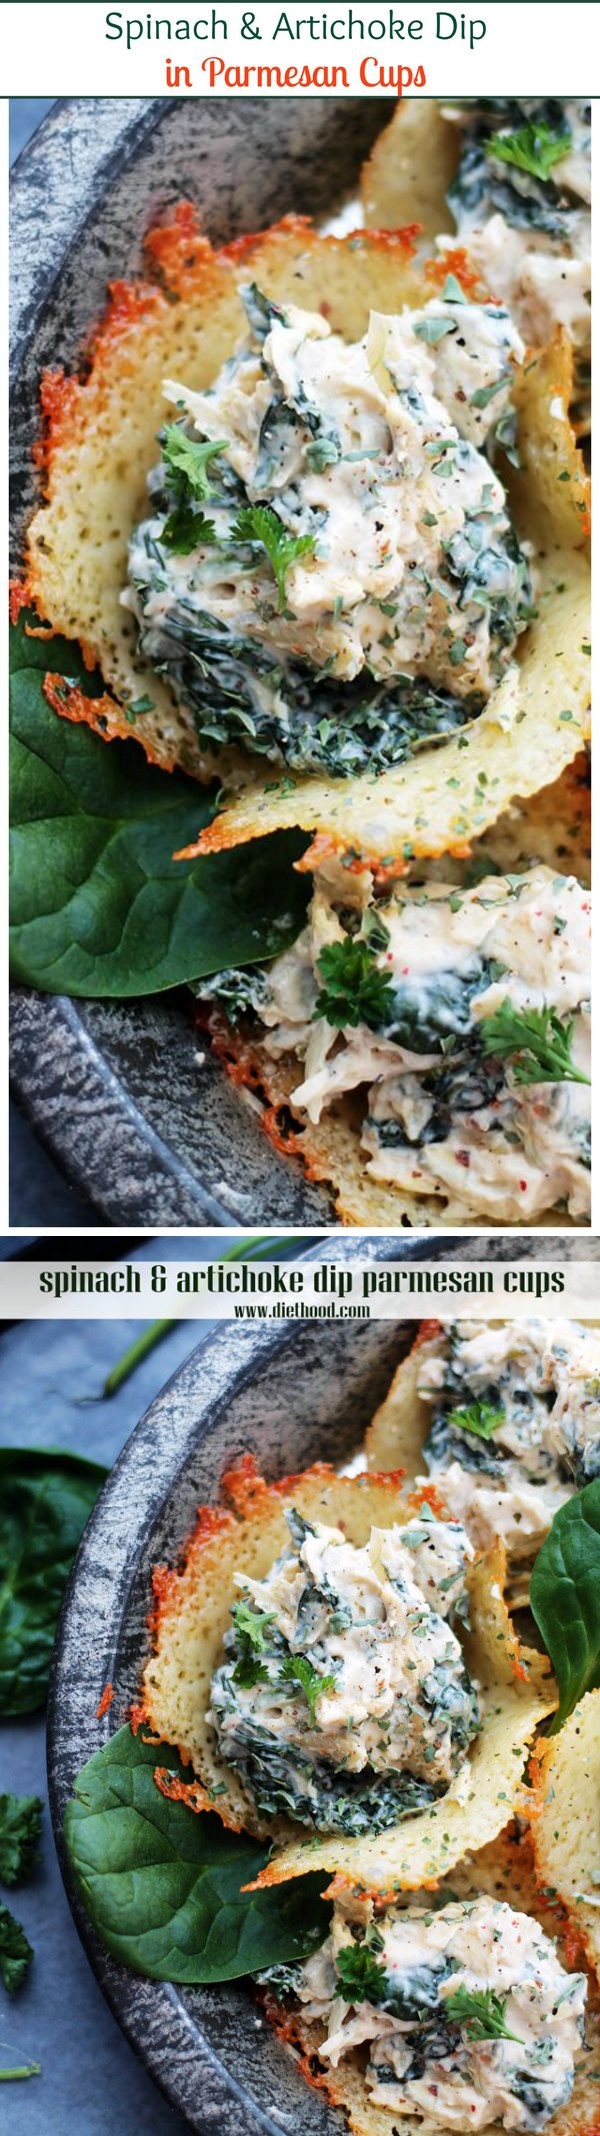 Spinach and Artichoke Dip Parmesan Cups